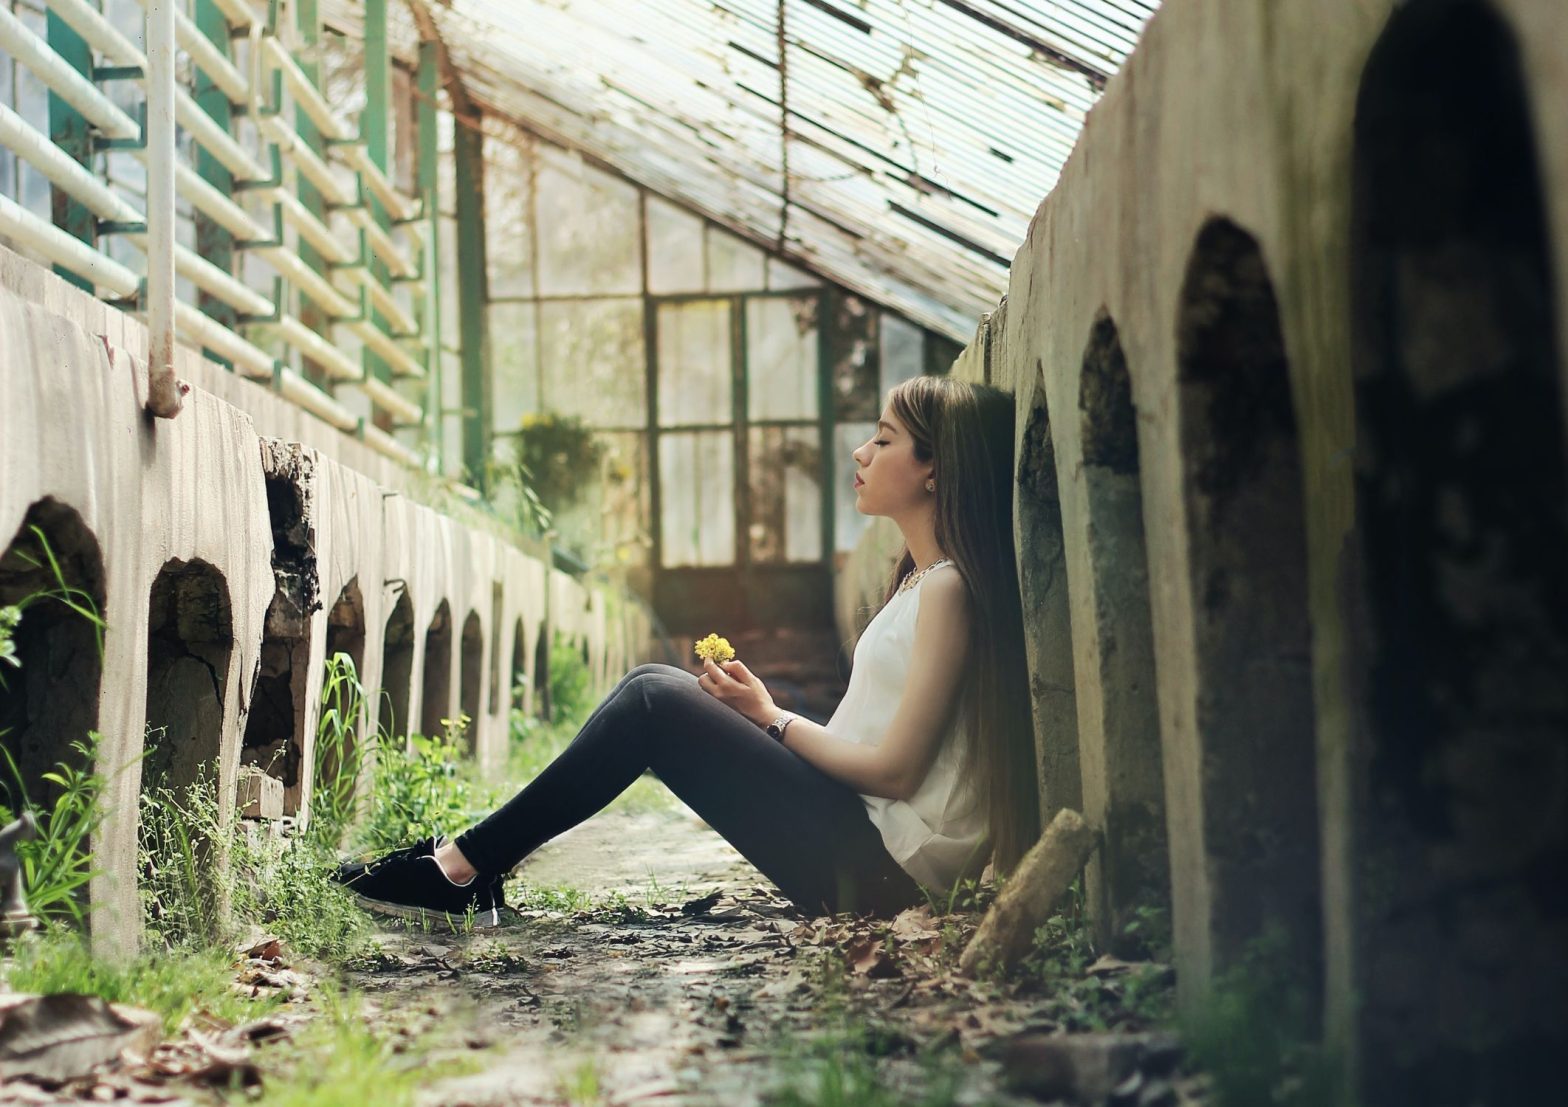 Image shows someone sitting against a wall in a contemplative state